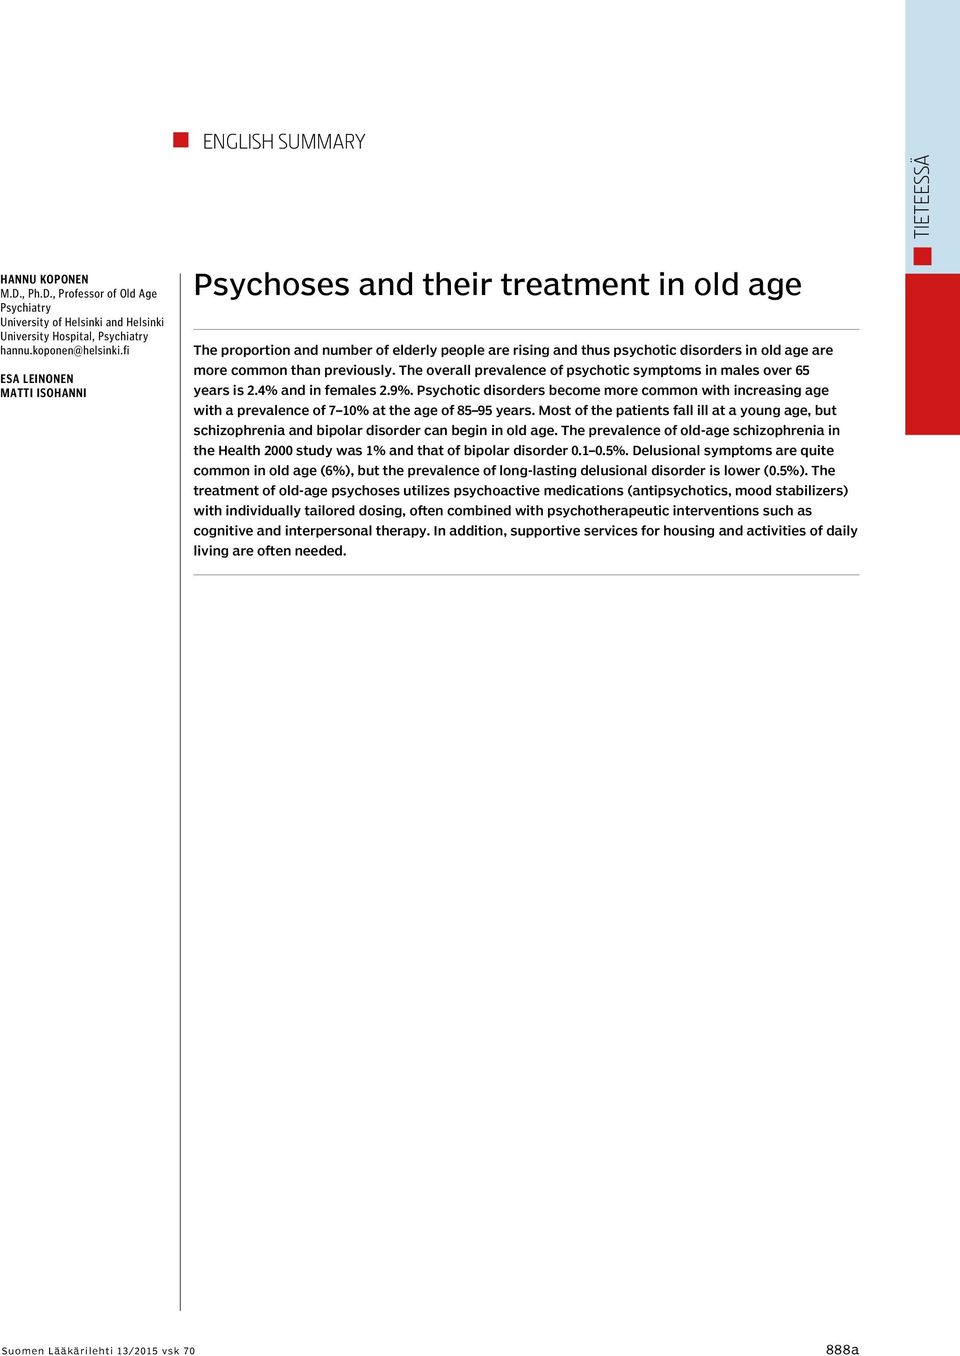 The overall prevalence of psychotic symptoms in males over 65 years is 2.4% and in females 2.9%.